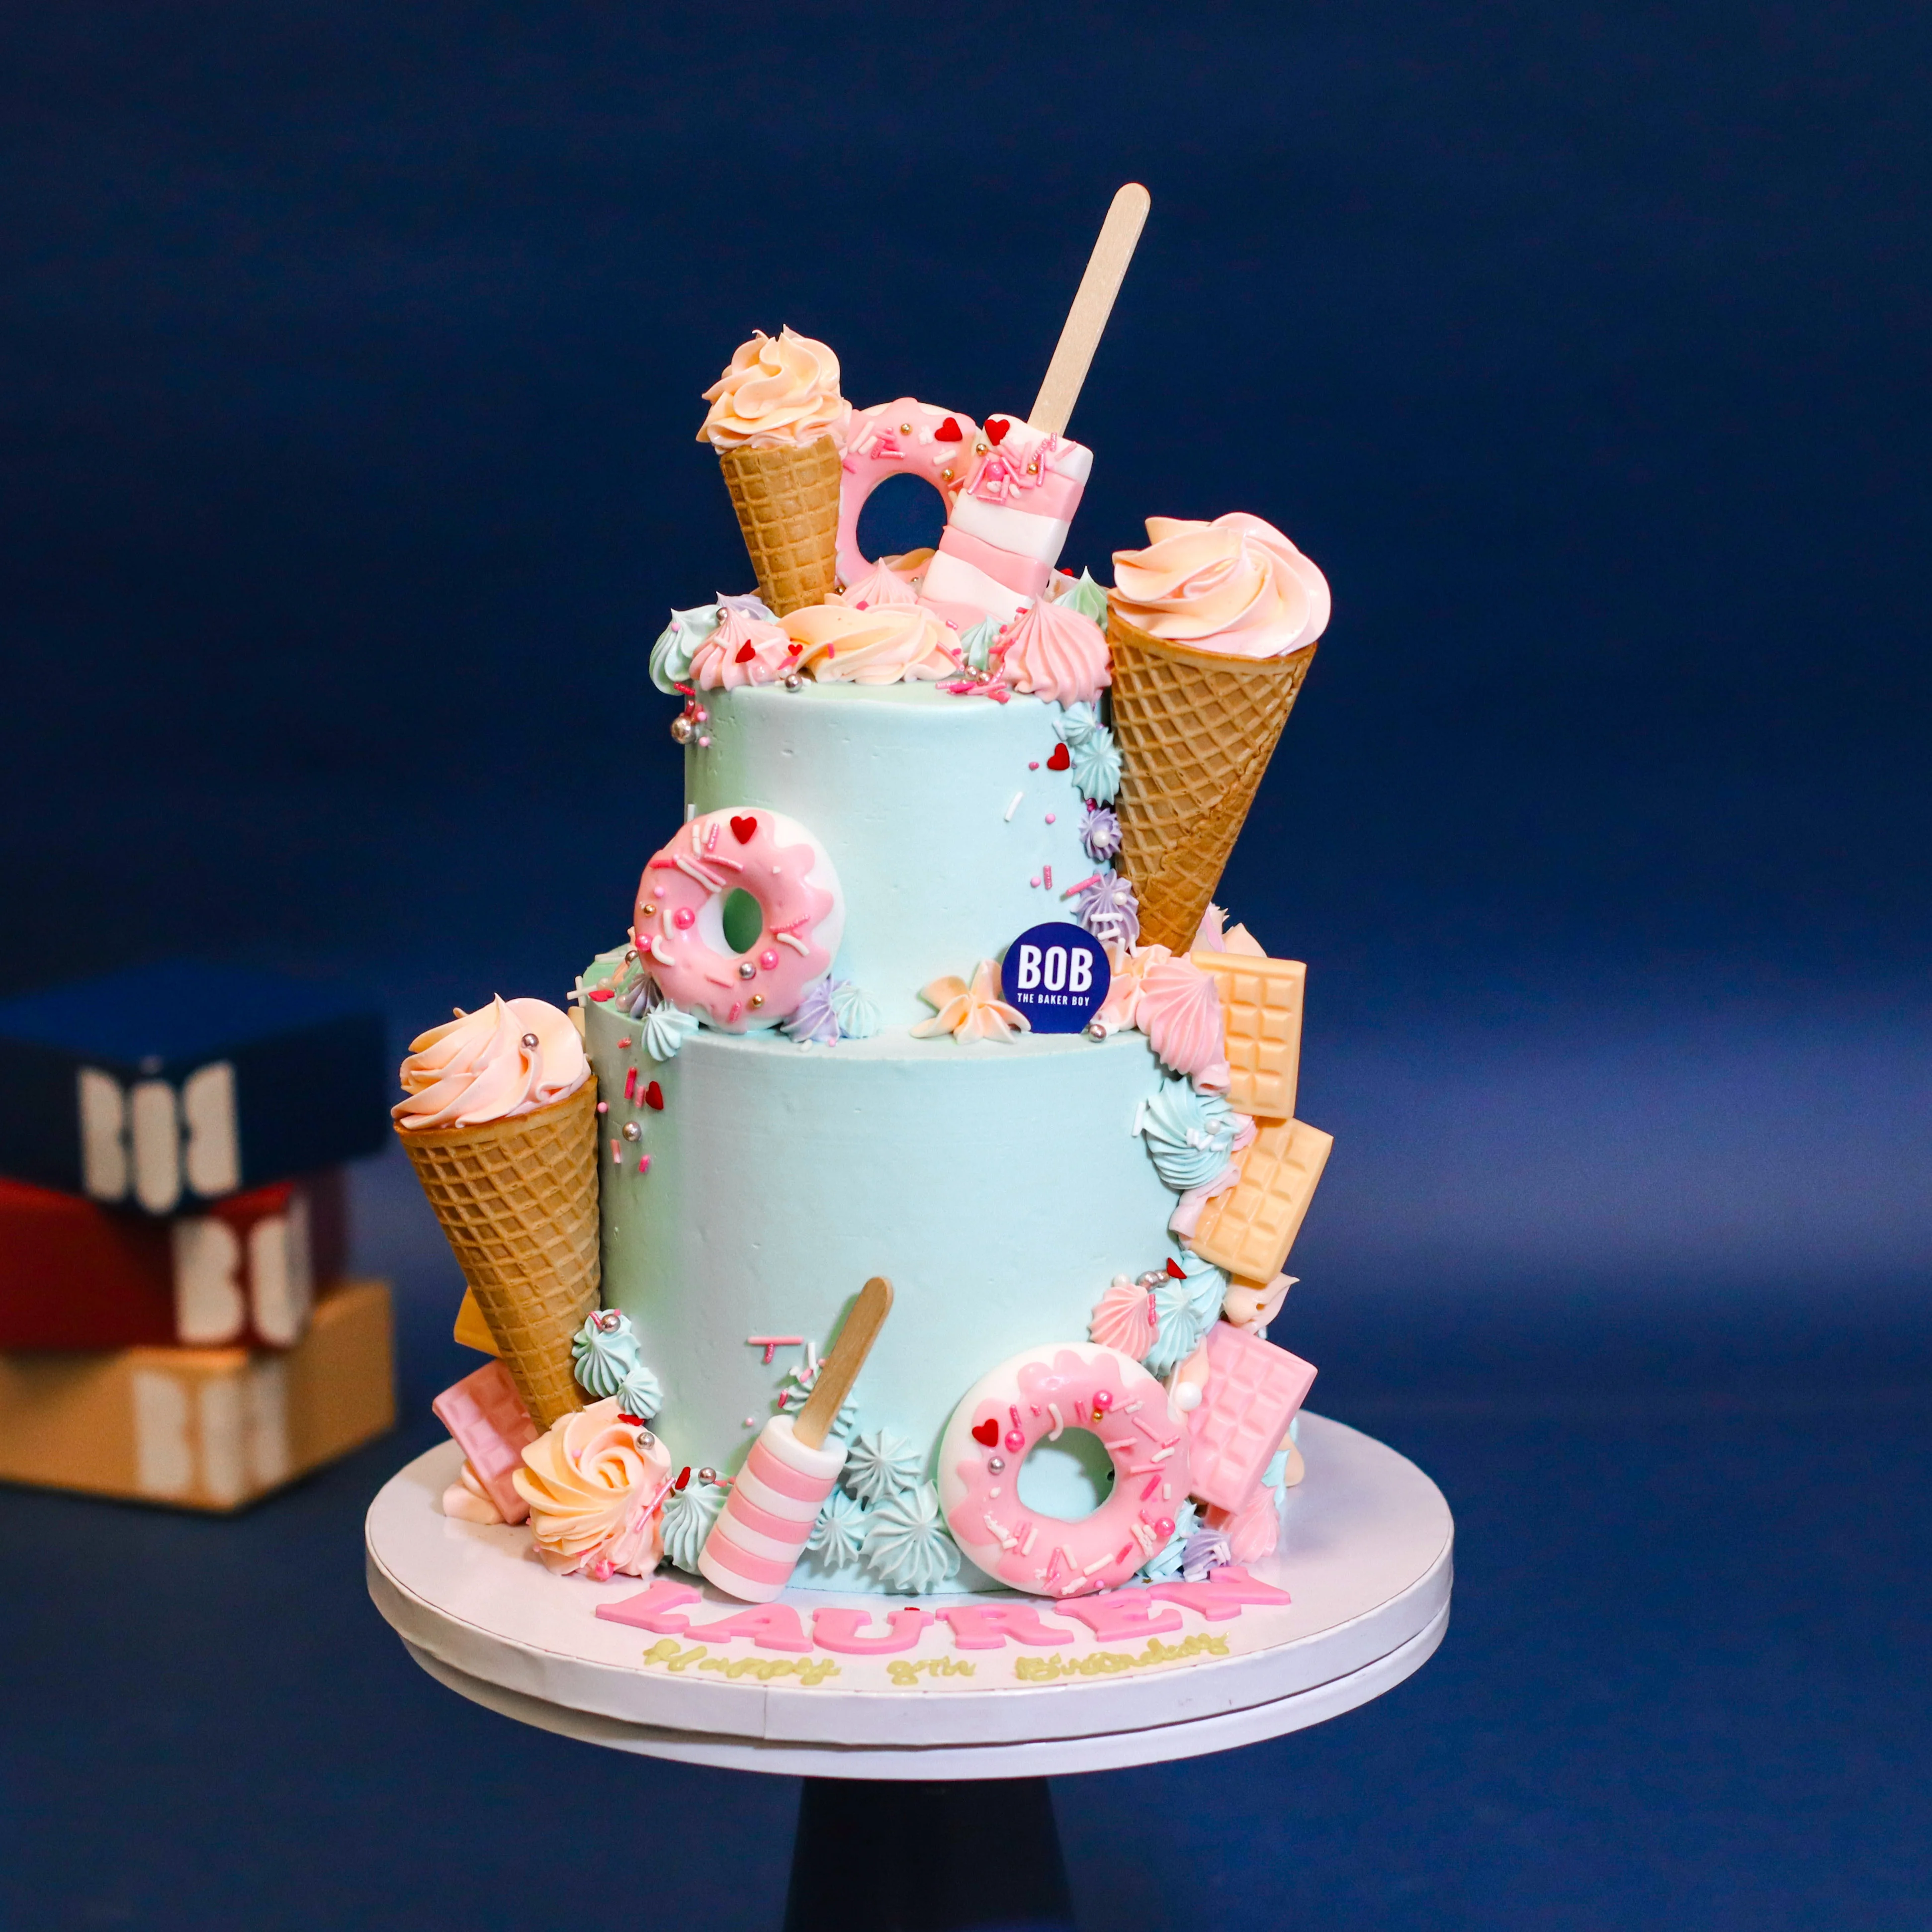 Cake Decorating With Candy And Lollies - Novelty Birthday Cakes